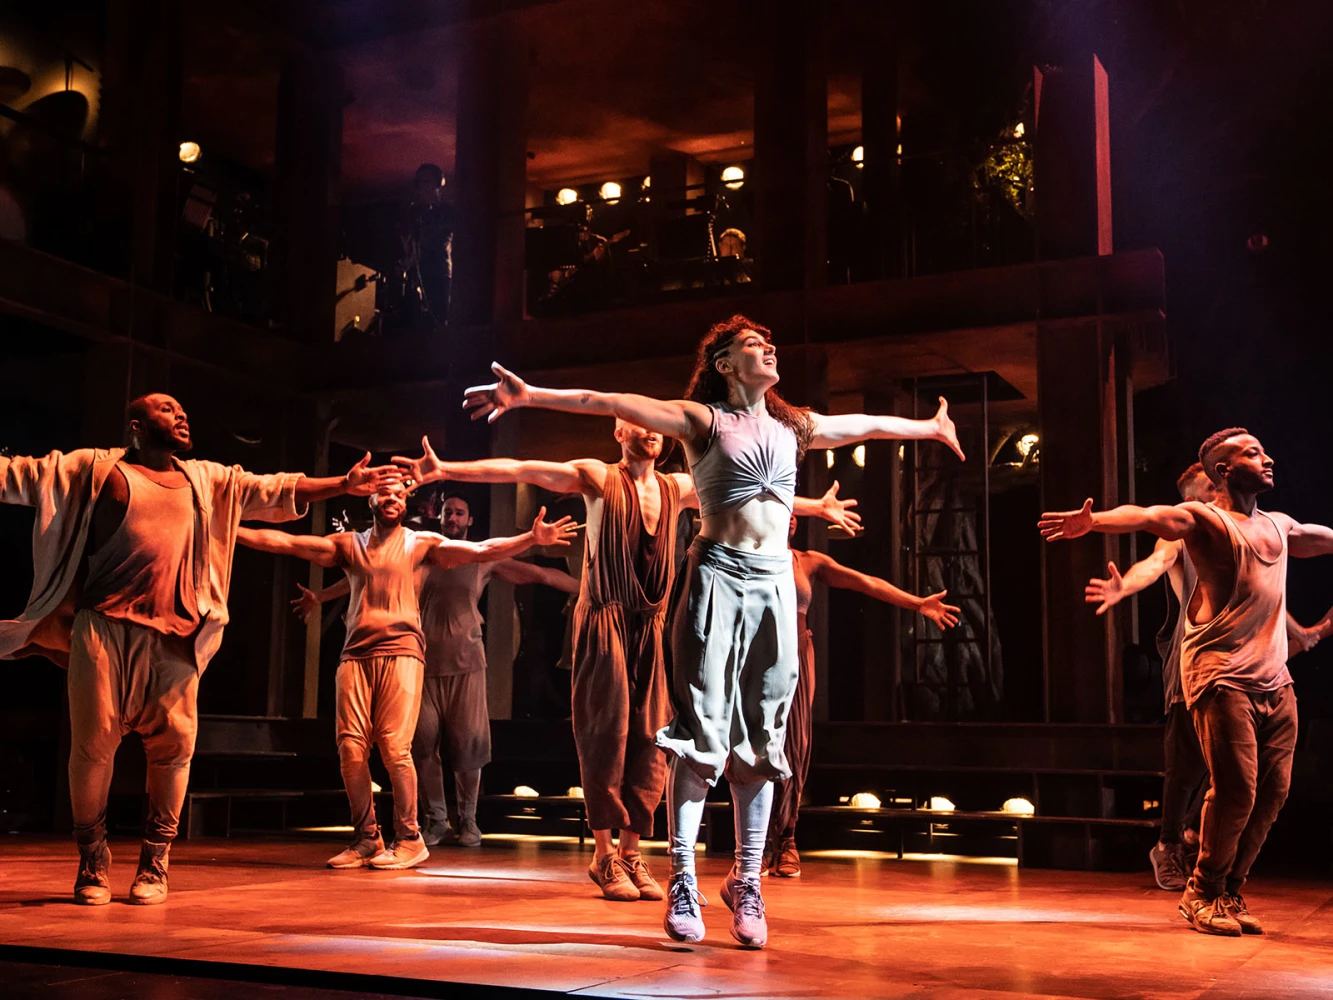 Jesus Christ Superstar: What to expect - 3